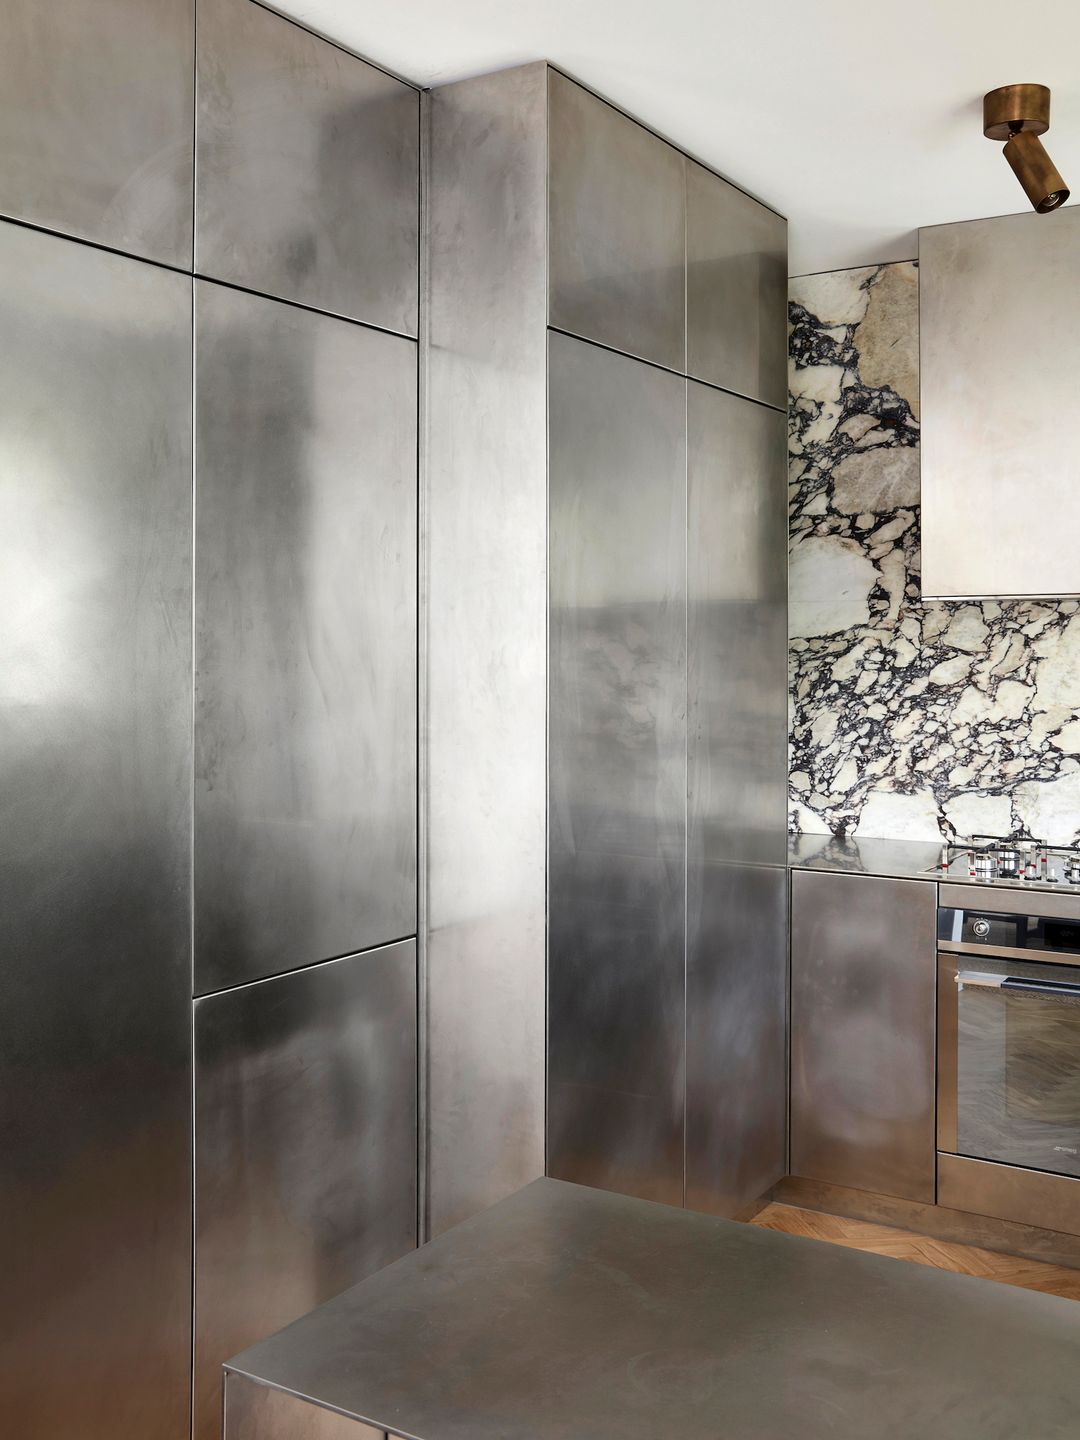 Sydney-based interior designer Tamsin Johnson takes a definitive approach to metallic surfaces